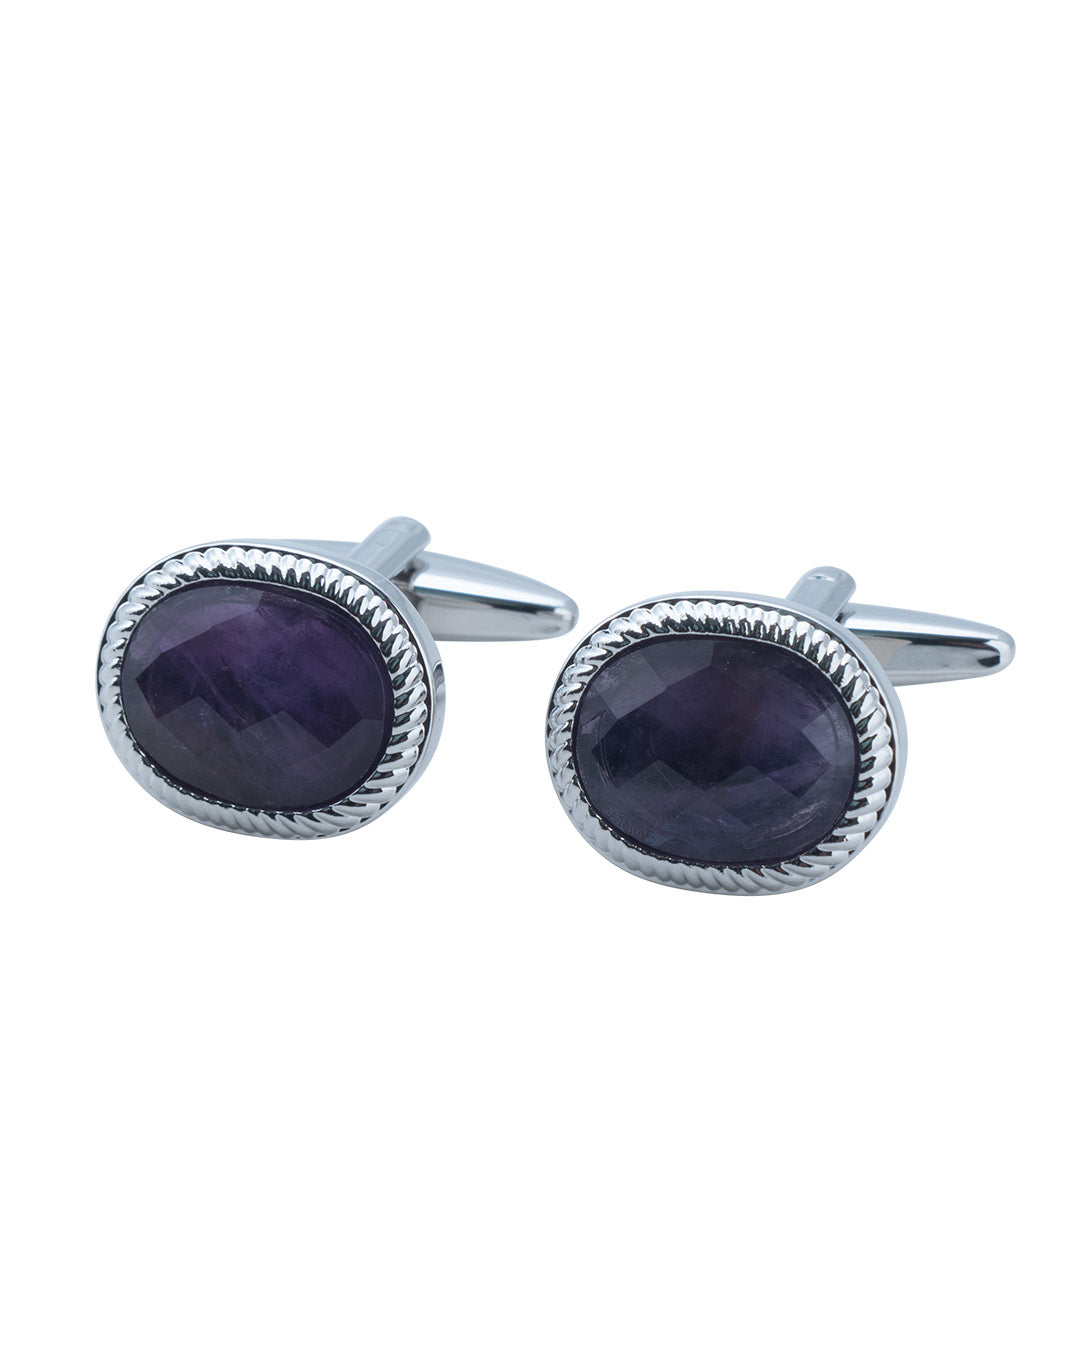 Oval Cufflinks With Textured Edge & Purple Faceted Stone